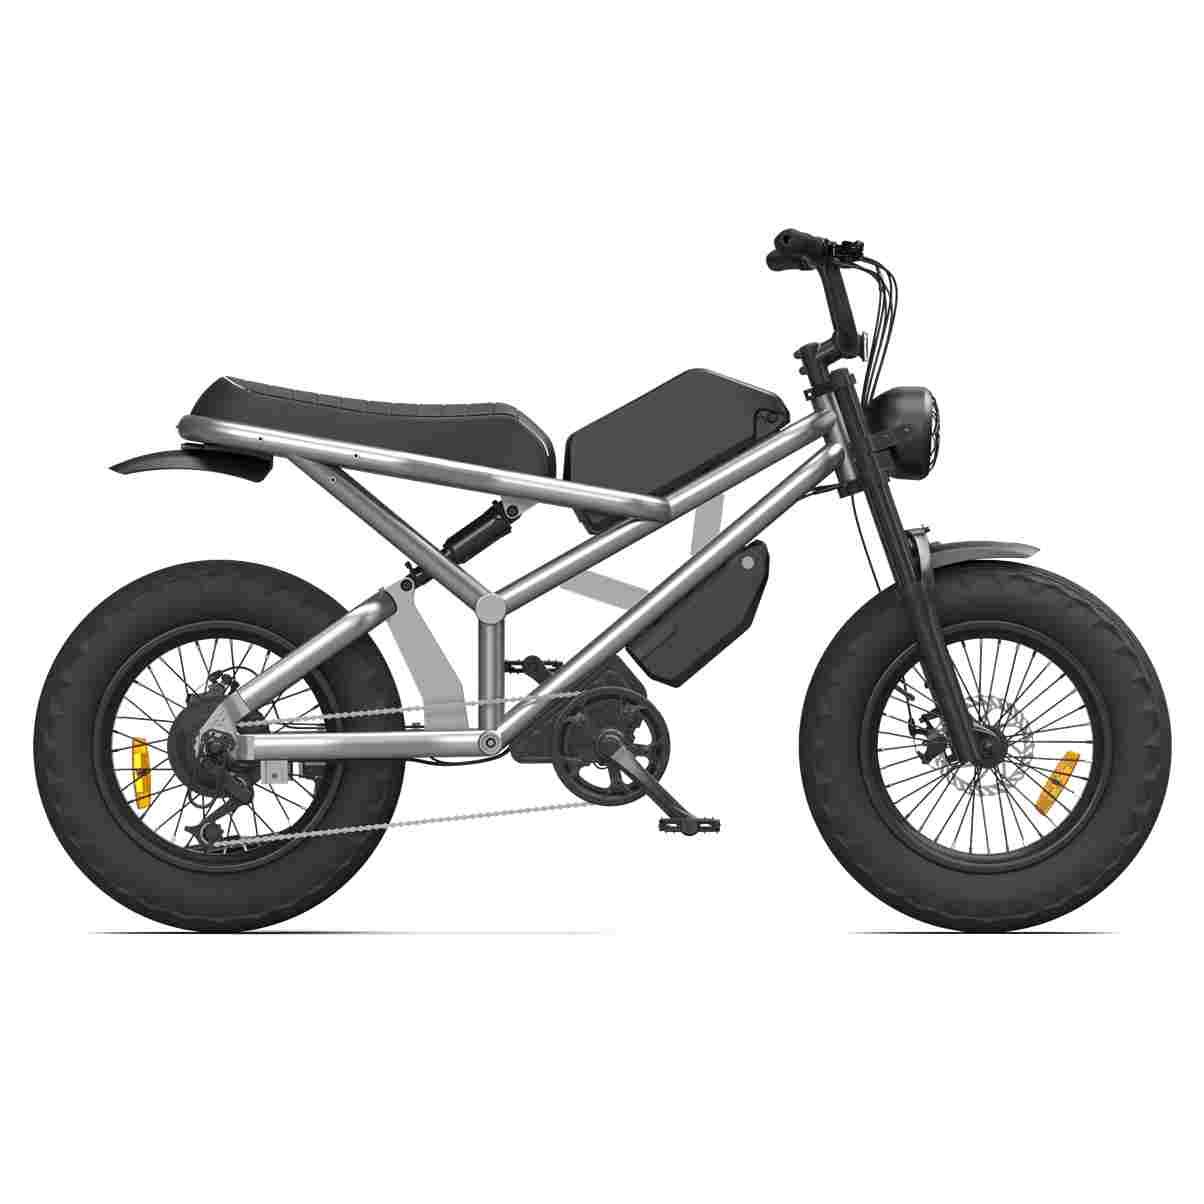 Custom Electric Motorcycle factory